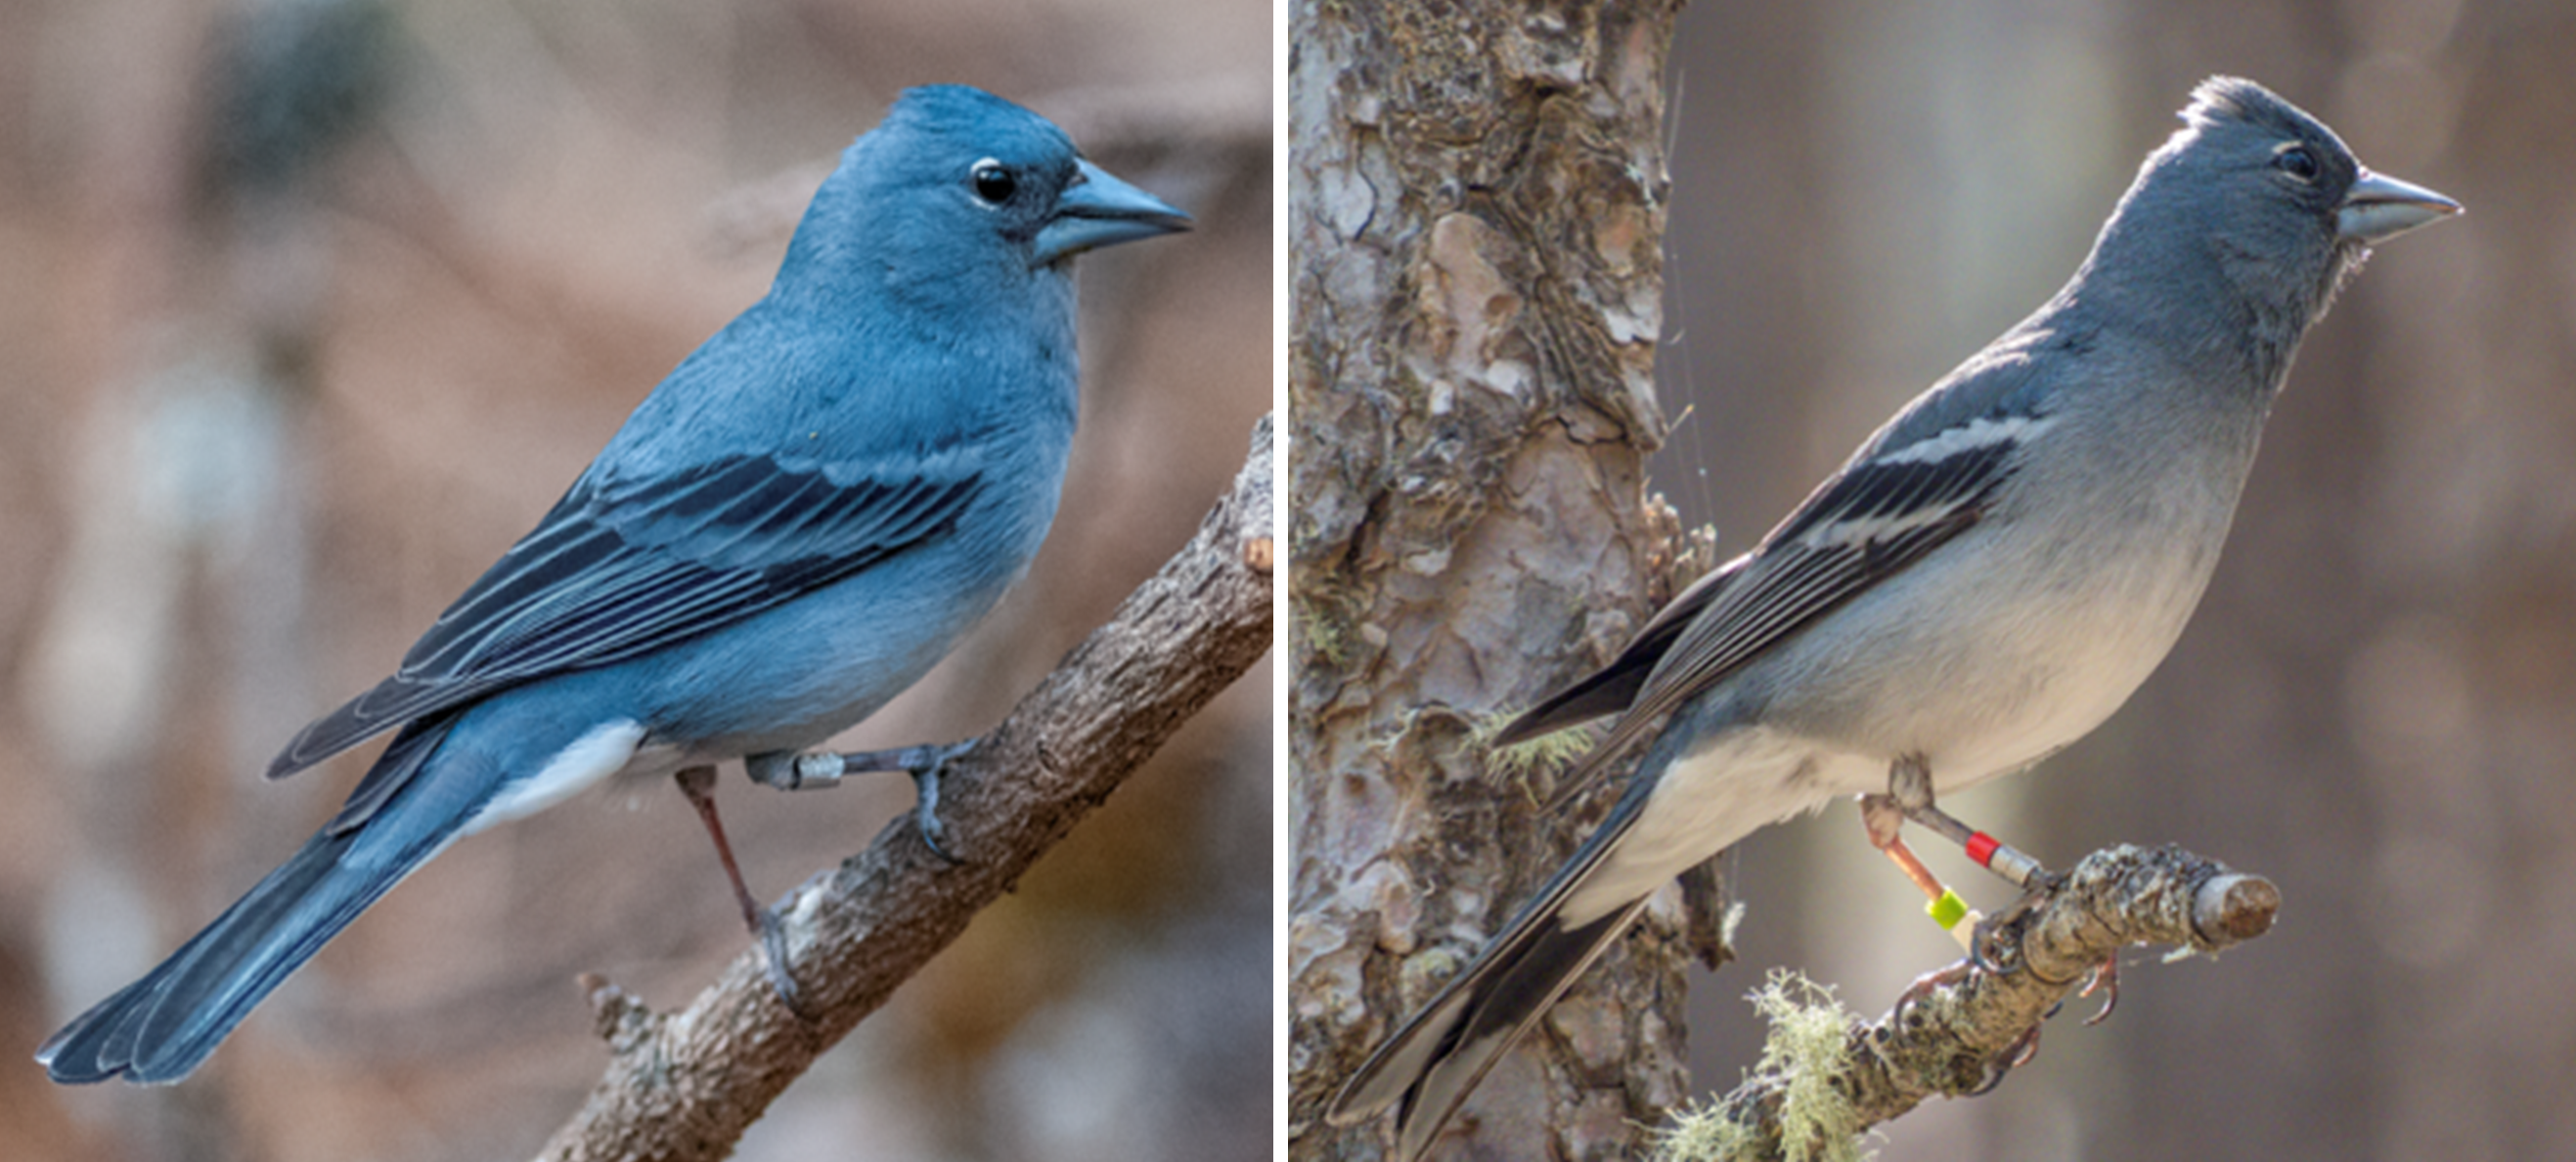 Images illustrate the plumage color and body complexion differences between both Blue Chaffinch populations (source Lifjeld et al. 2016, BMC Zoology).